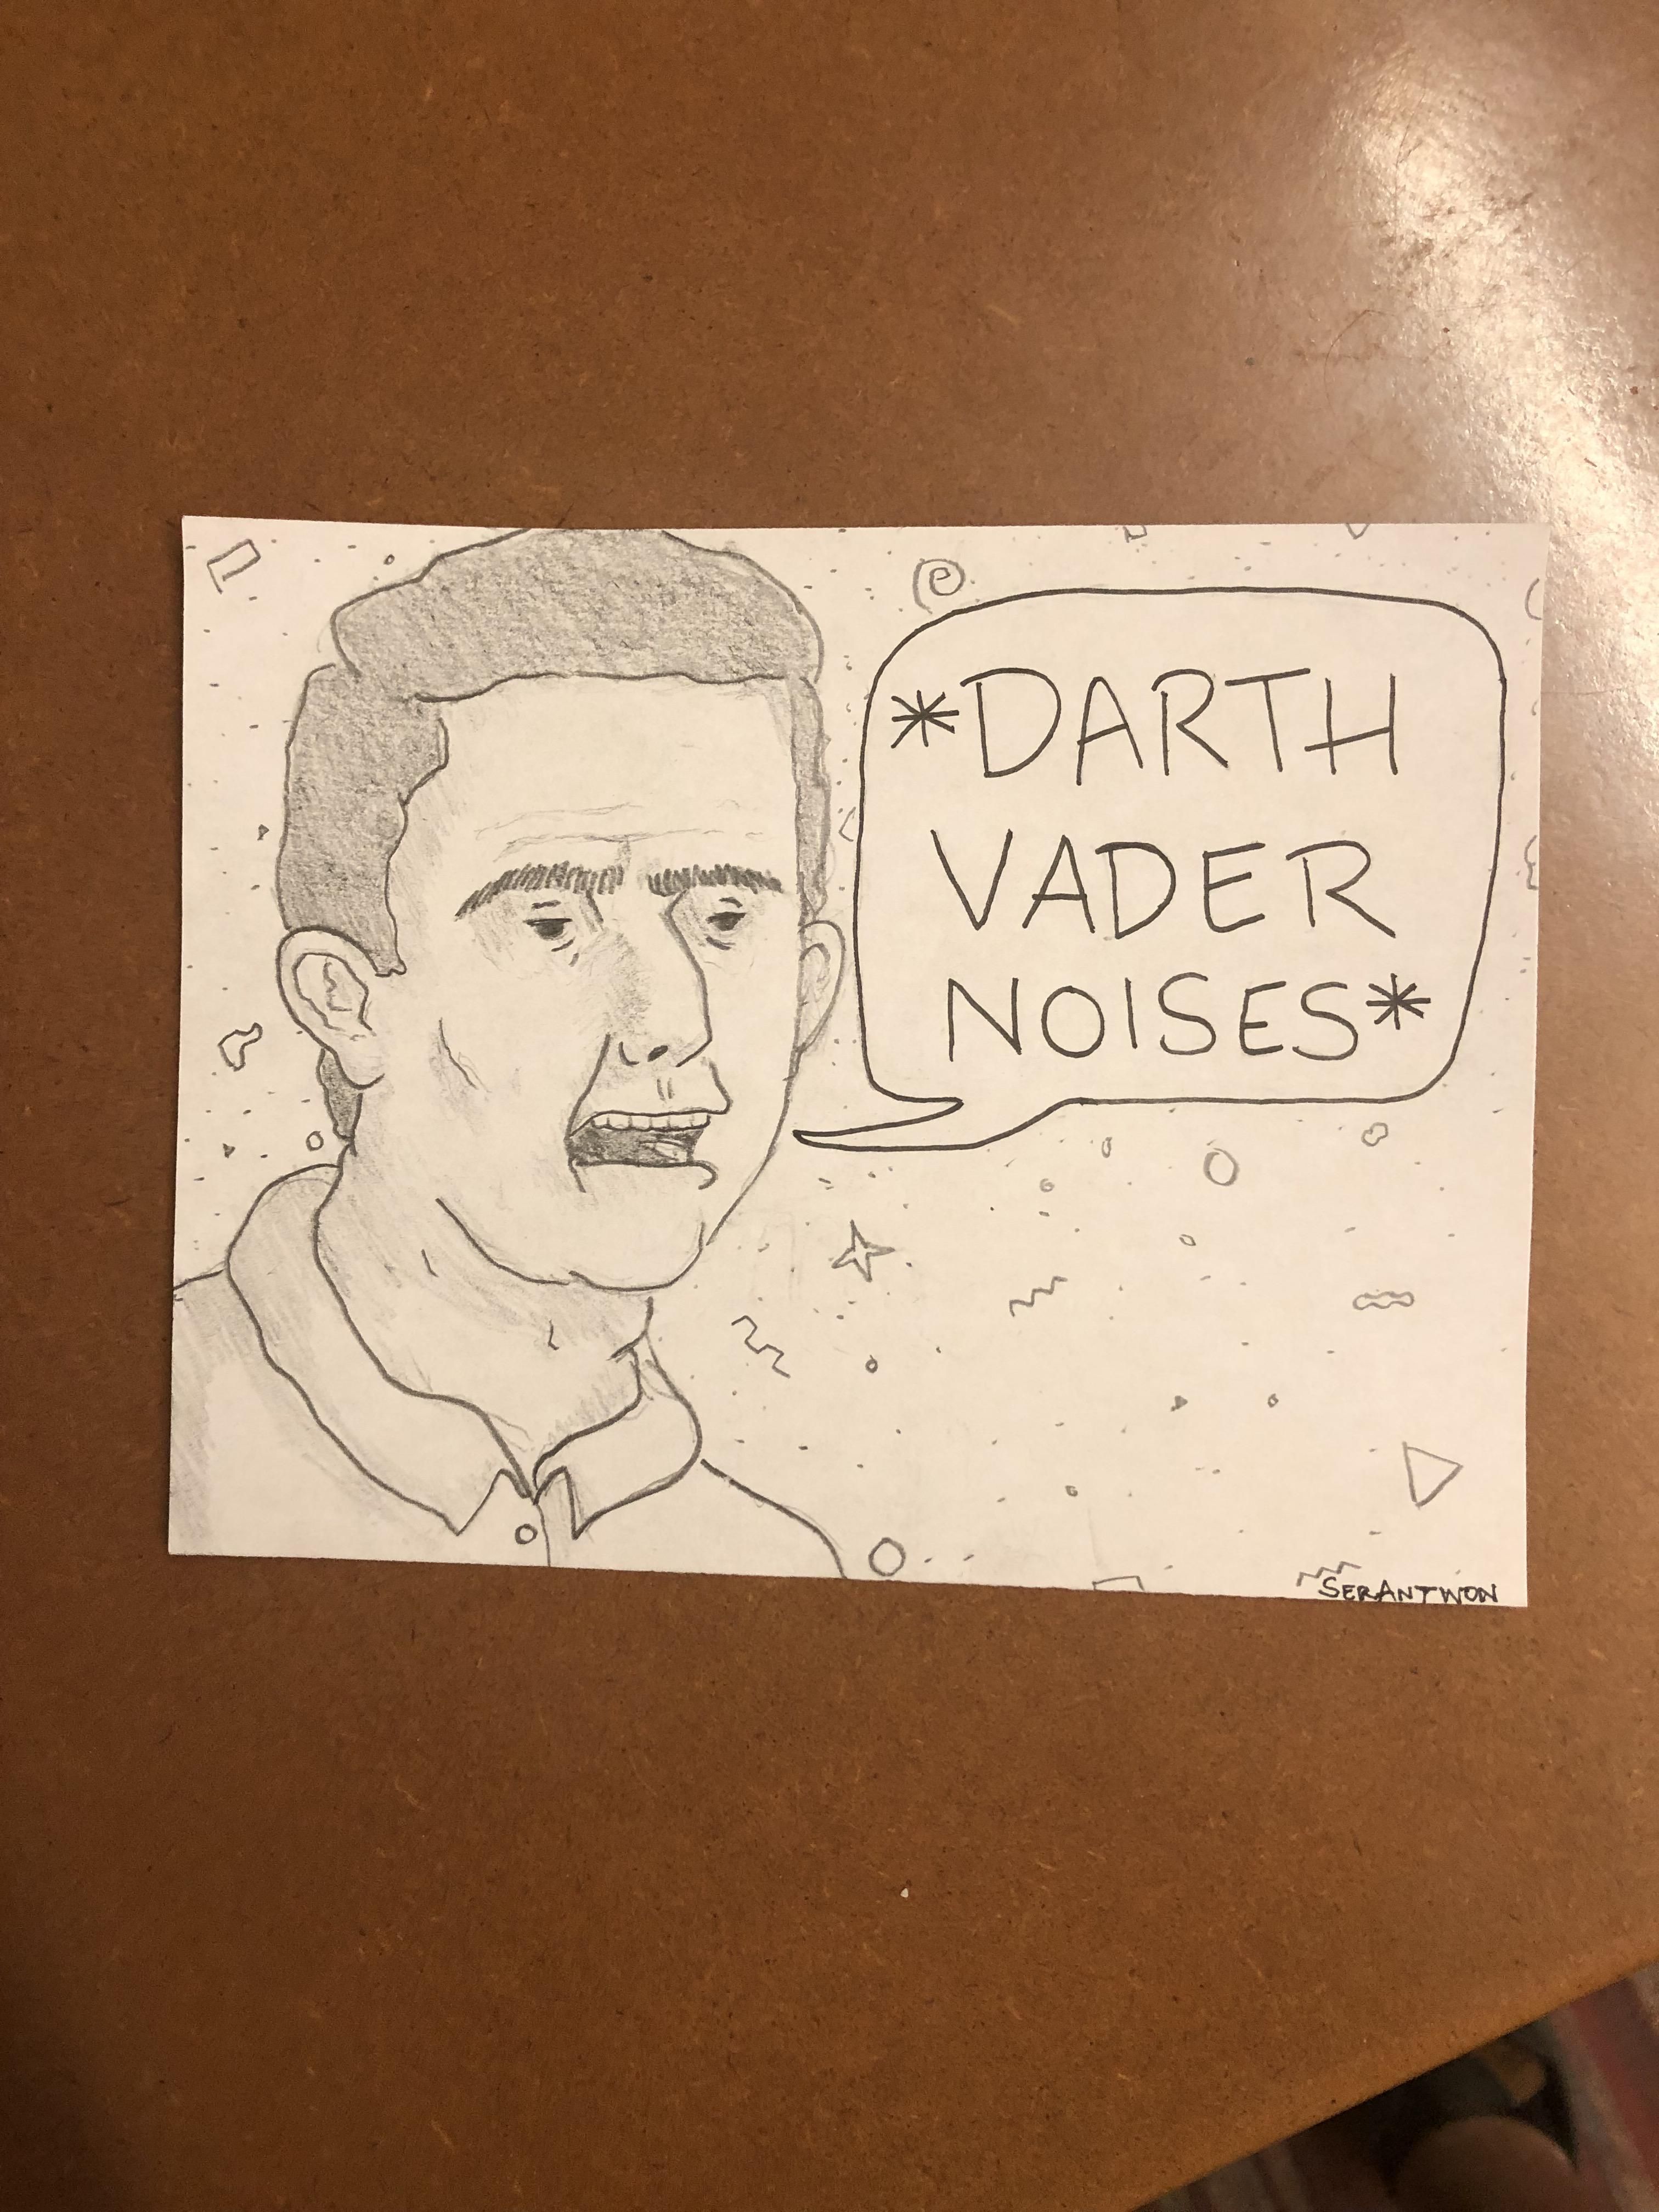 I work at a call center. Sometimes I like to draw what my callers might look like. Here’s Doug the mouth breather from today: